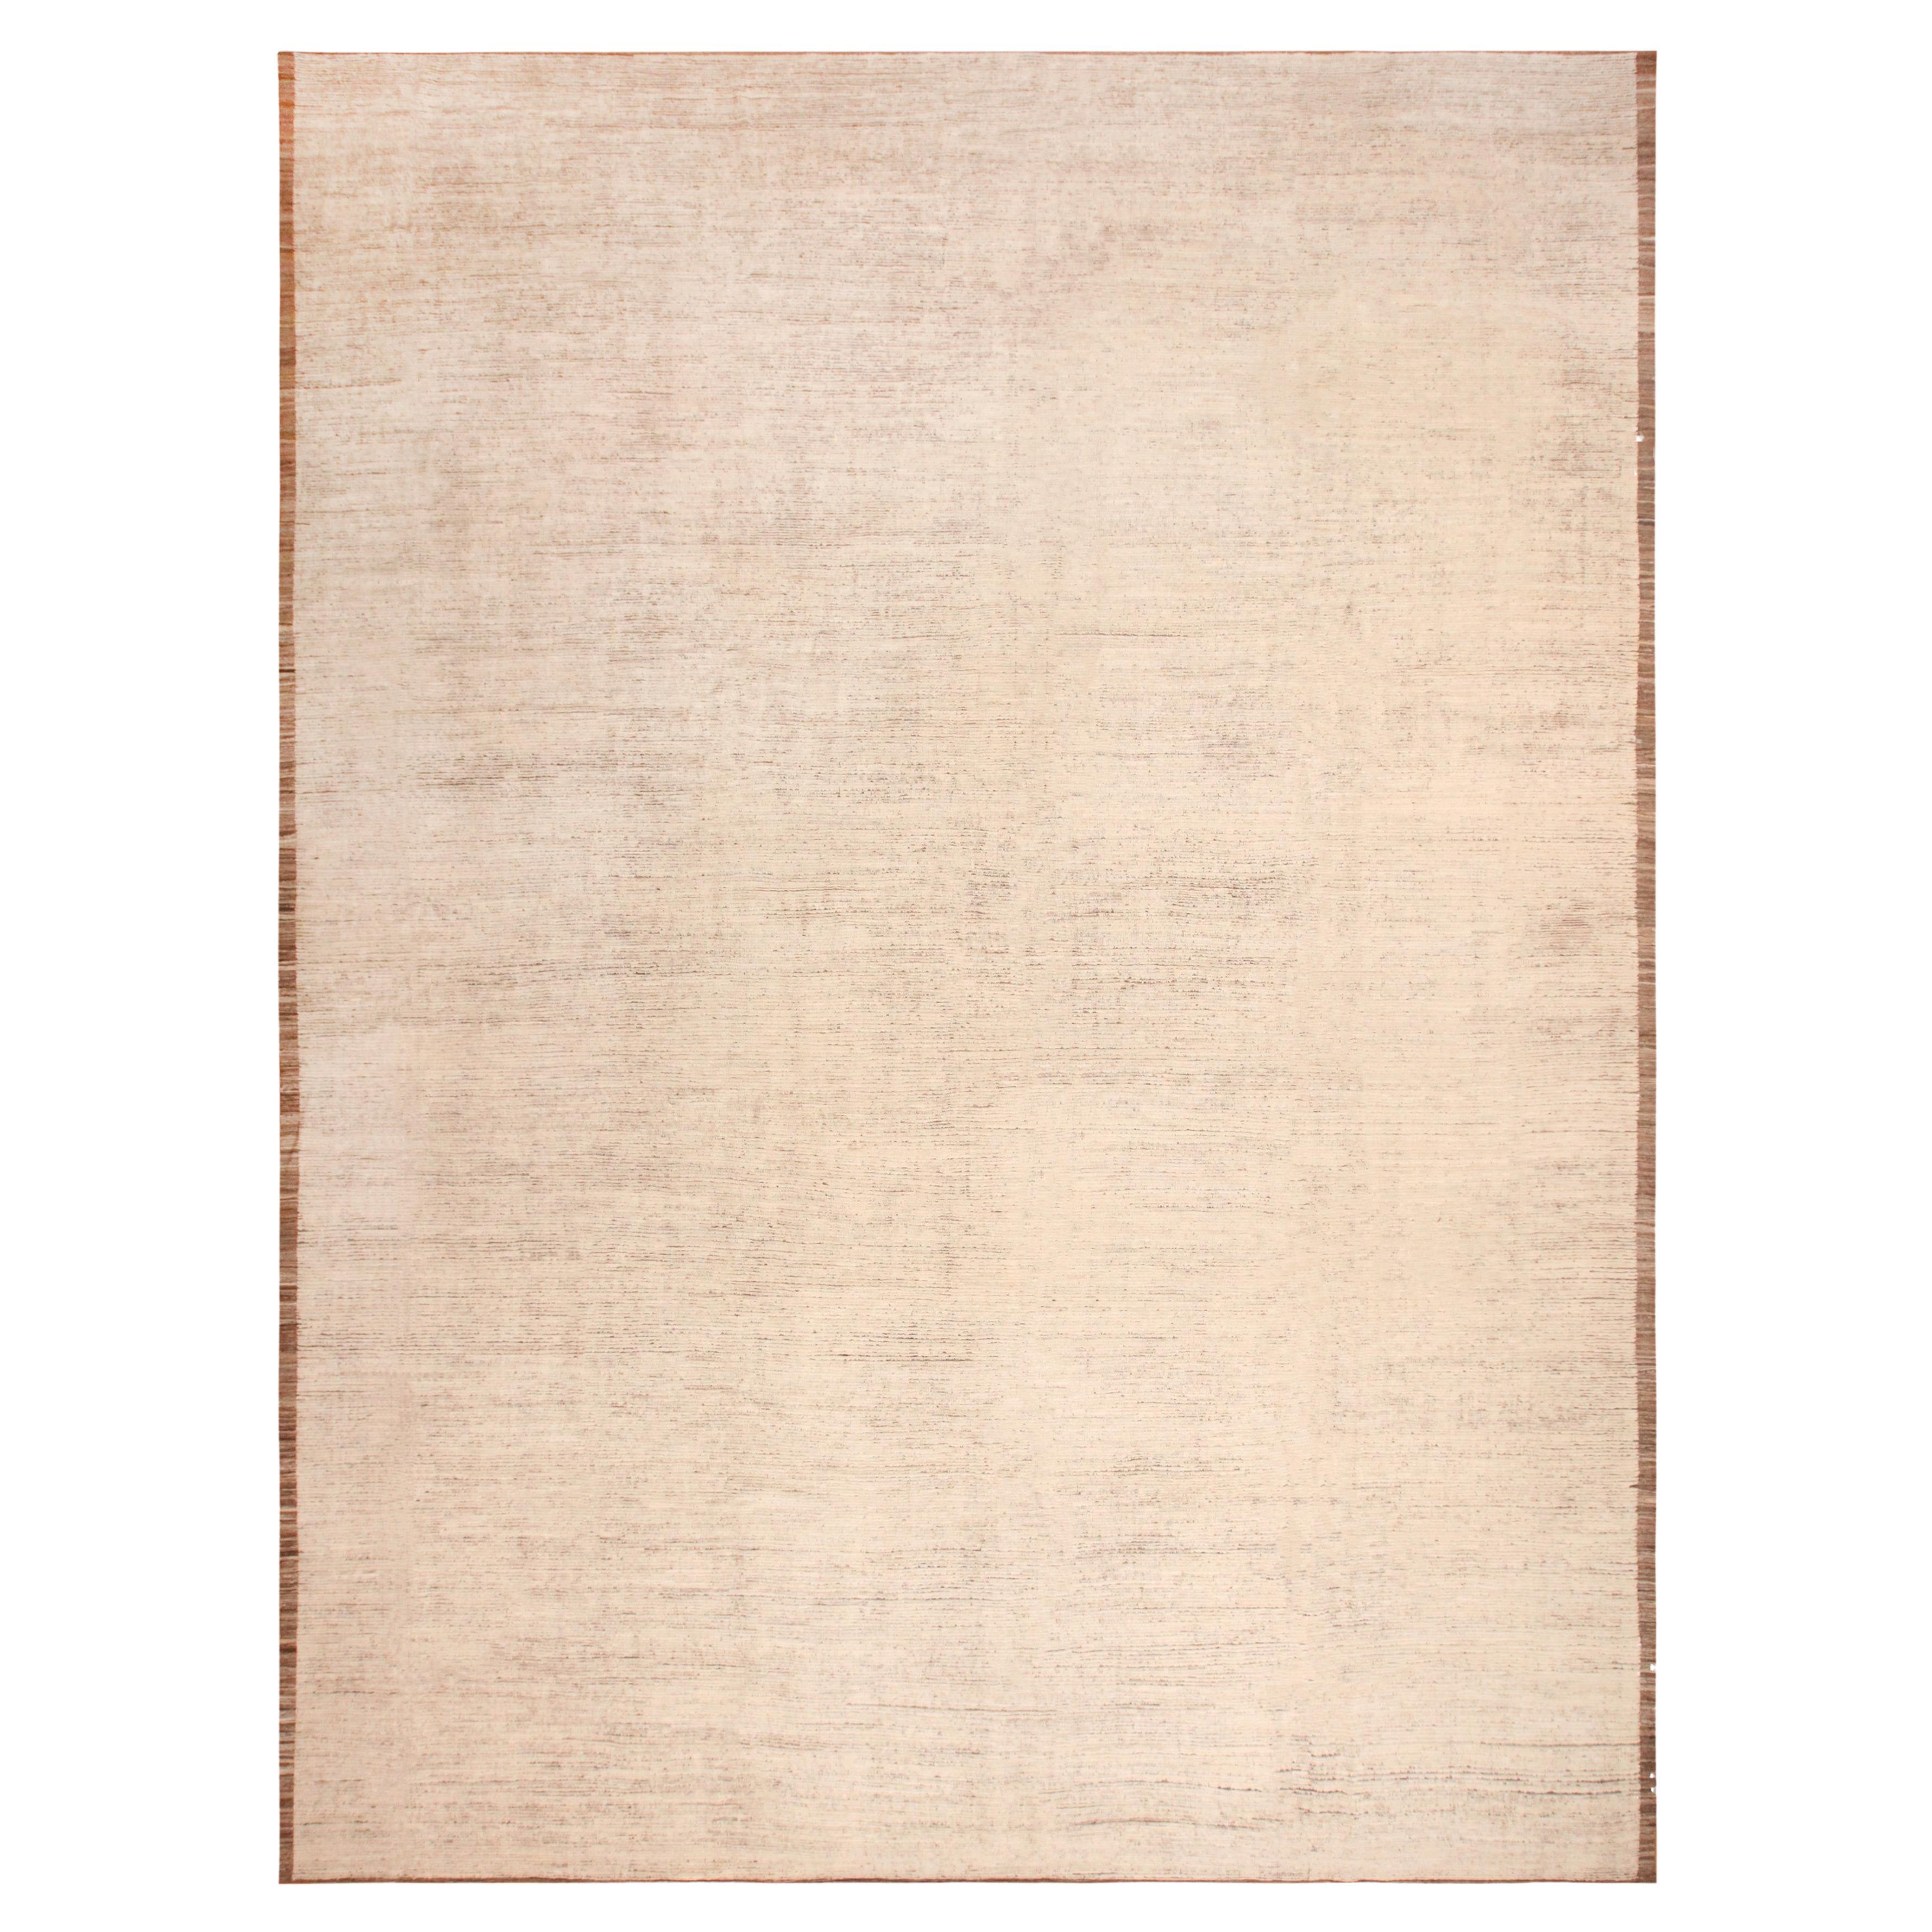 Nazmiyal Collection Large Ivory Cream Modern Chic Area Rug 14'6" x 19'5"